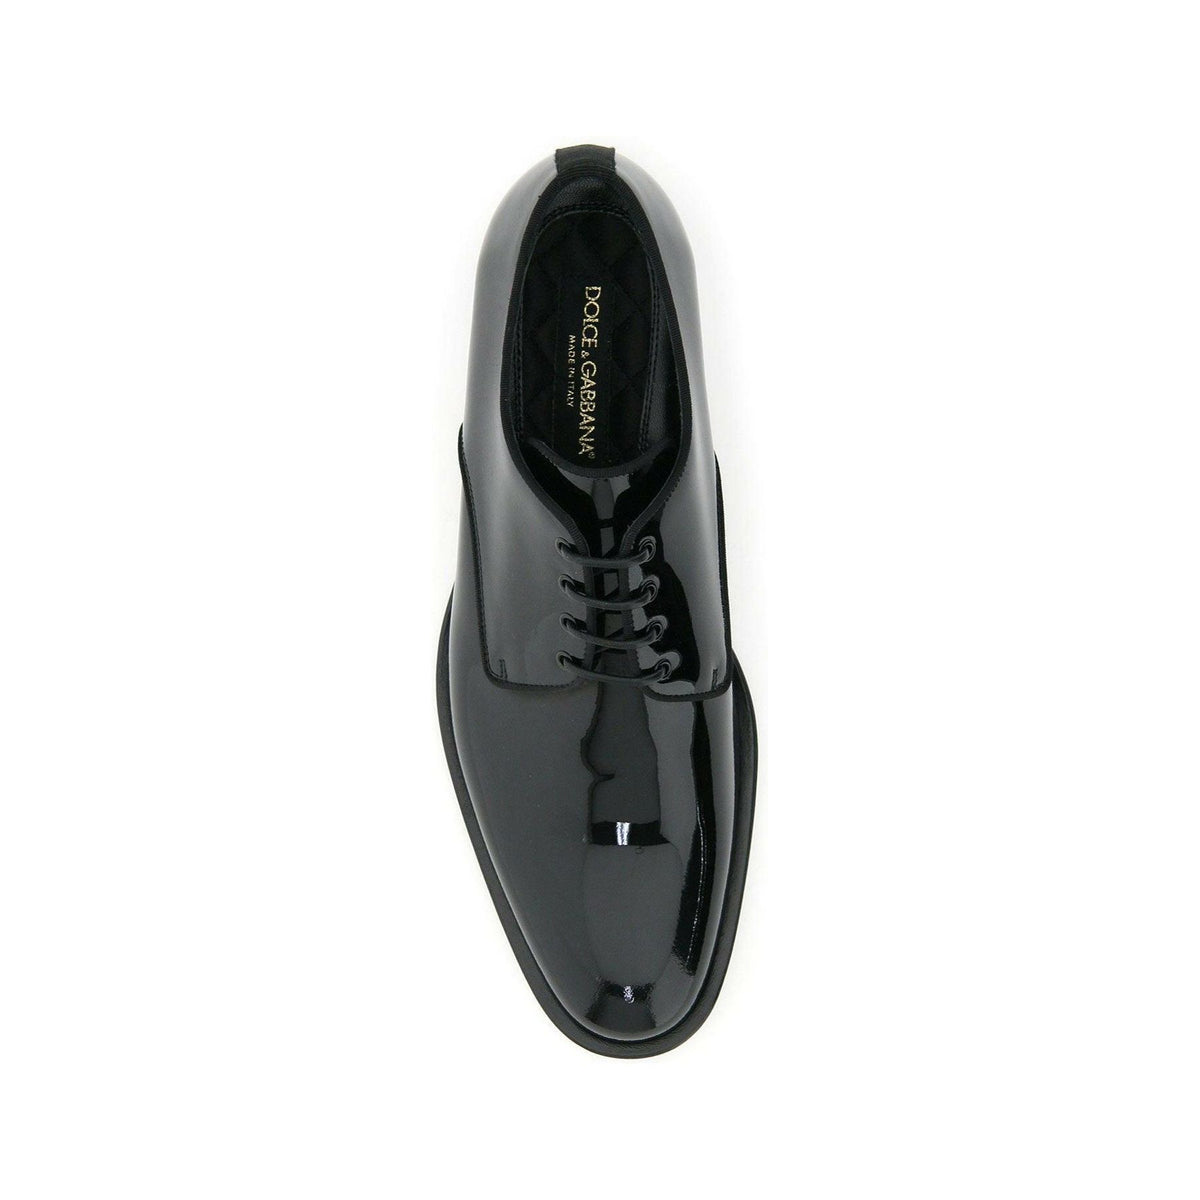 Black Patent Leather Lace Up Derby Shoes With Grosgrain Hems DOLCE & GABBANA JOHN JULIA.